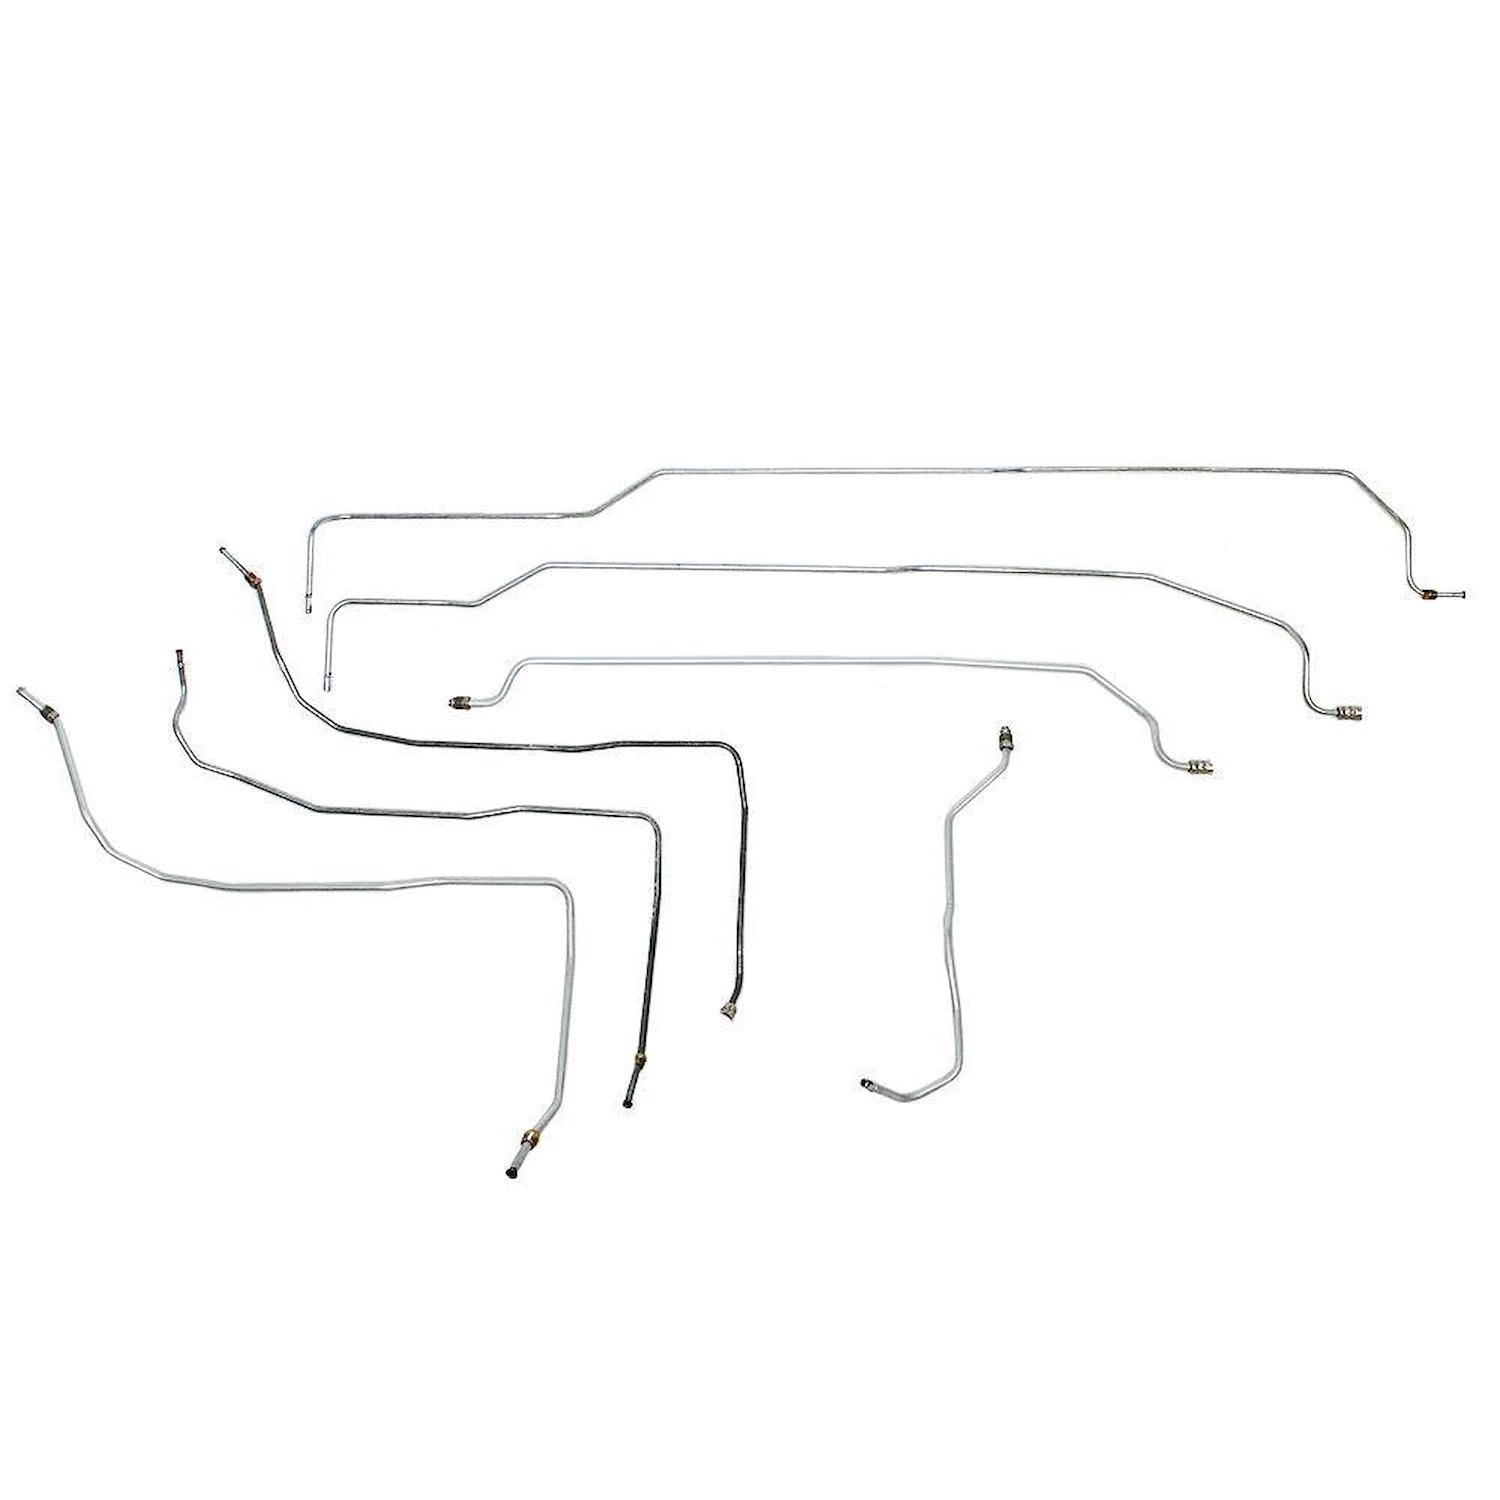 Complete Fuel Line Kit for 2001-2003 GM 2500HD/3500HD Regular Cab (Gas) Trucks with Long Bed [Stainless Steel]